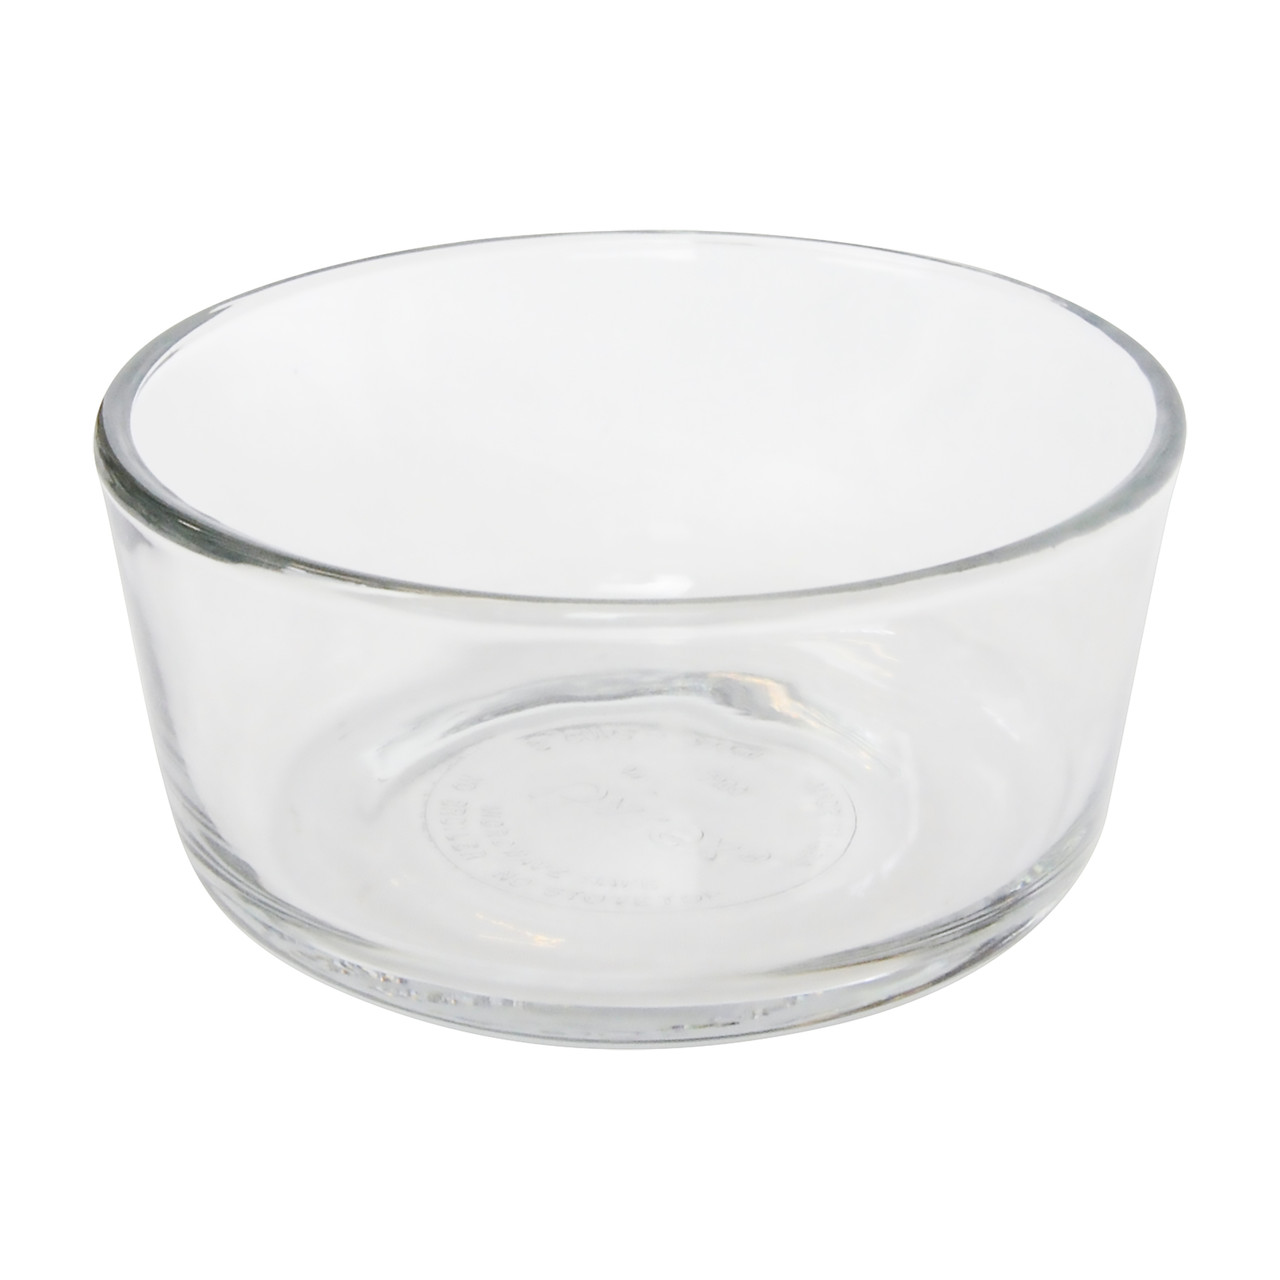 Mail Verlenen groot Pyrex 7200 Simply Store 2-Cup Round Clear Glass Food Storage Bowl (2-Pack)  | Helton Tool & Home